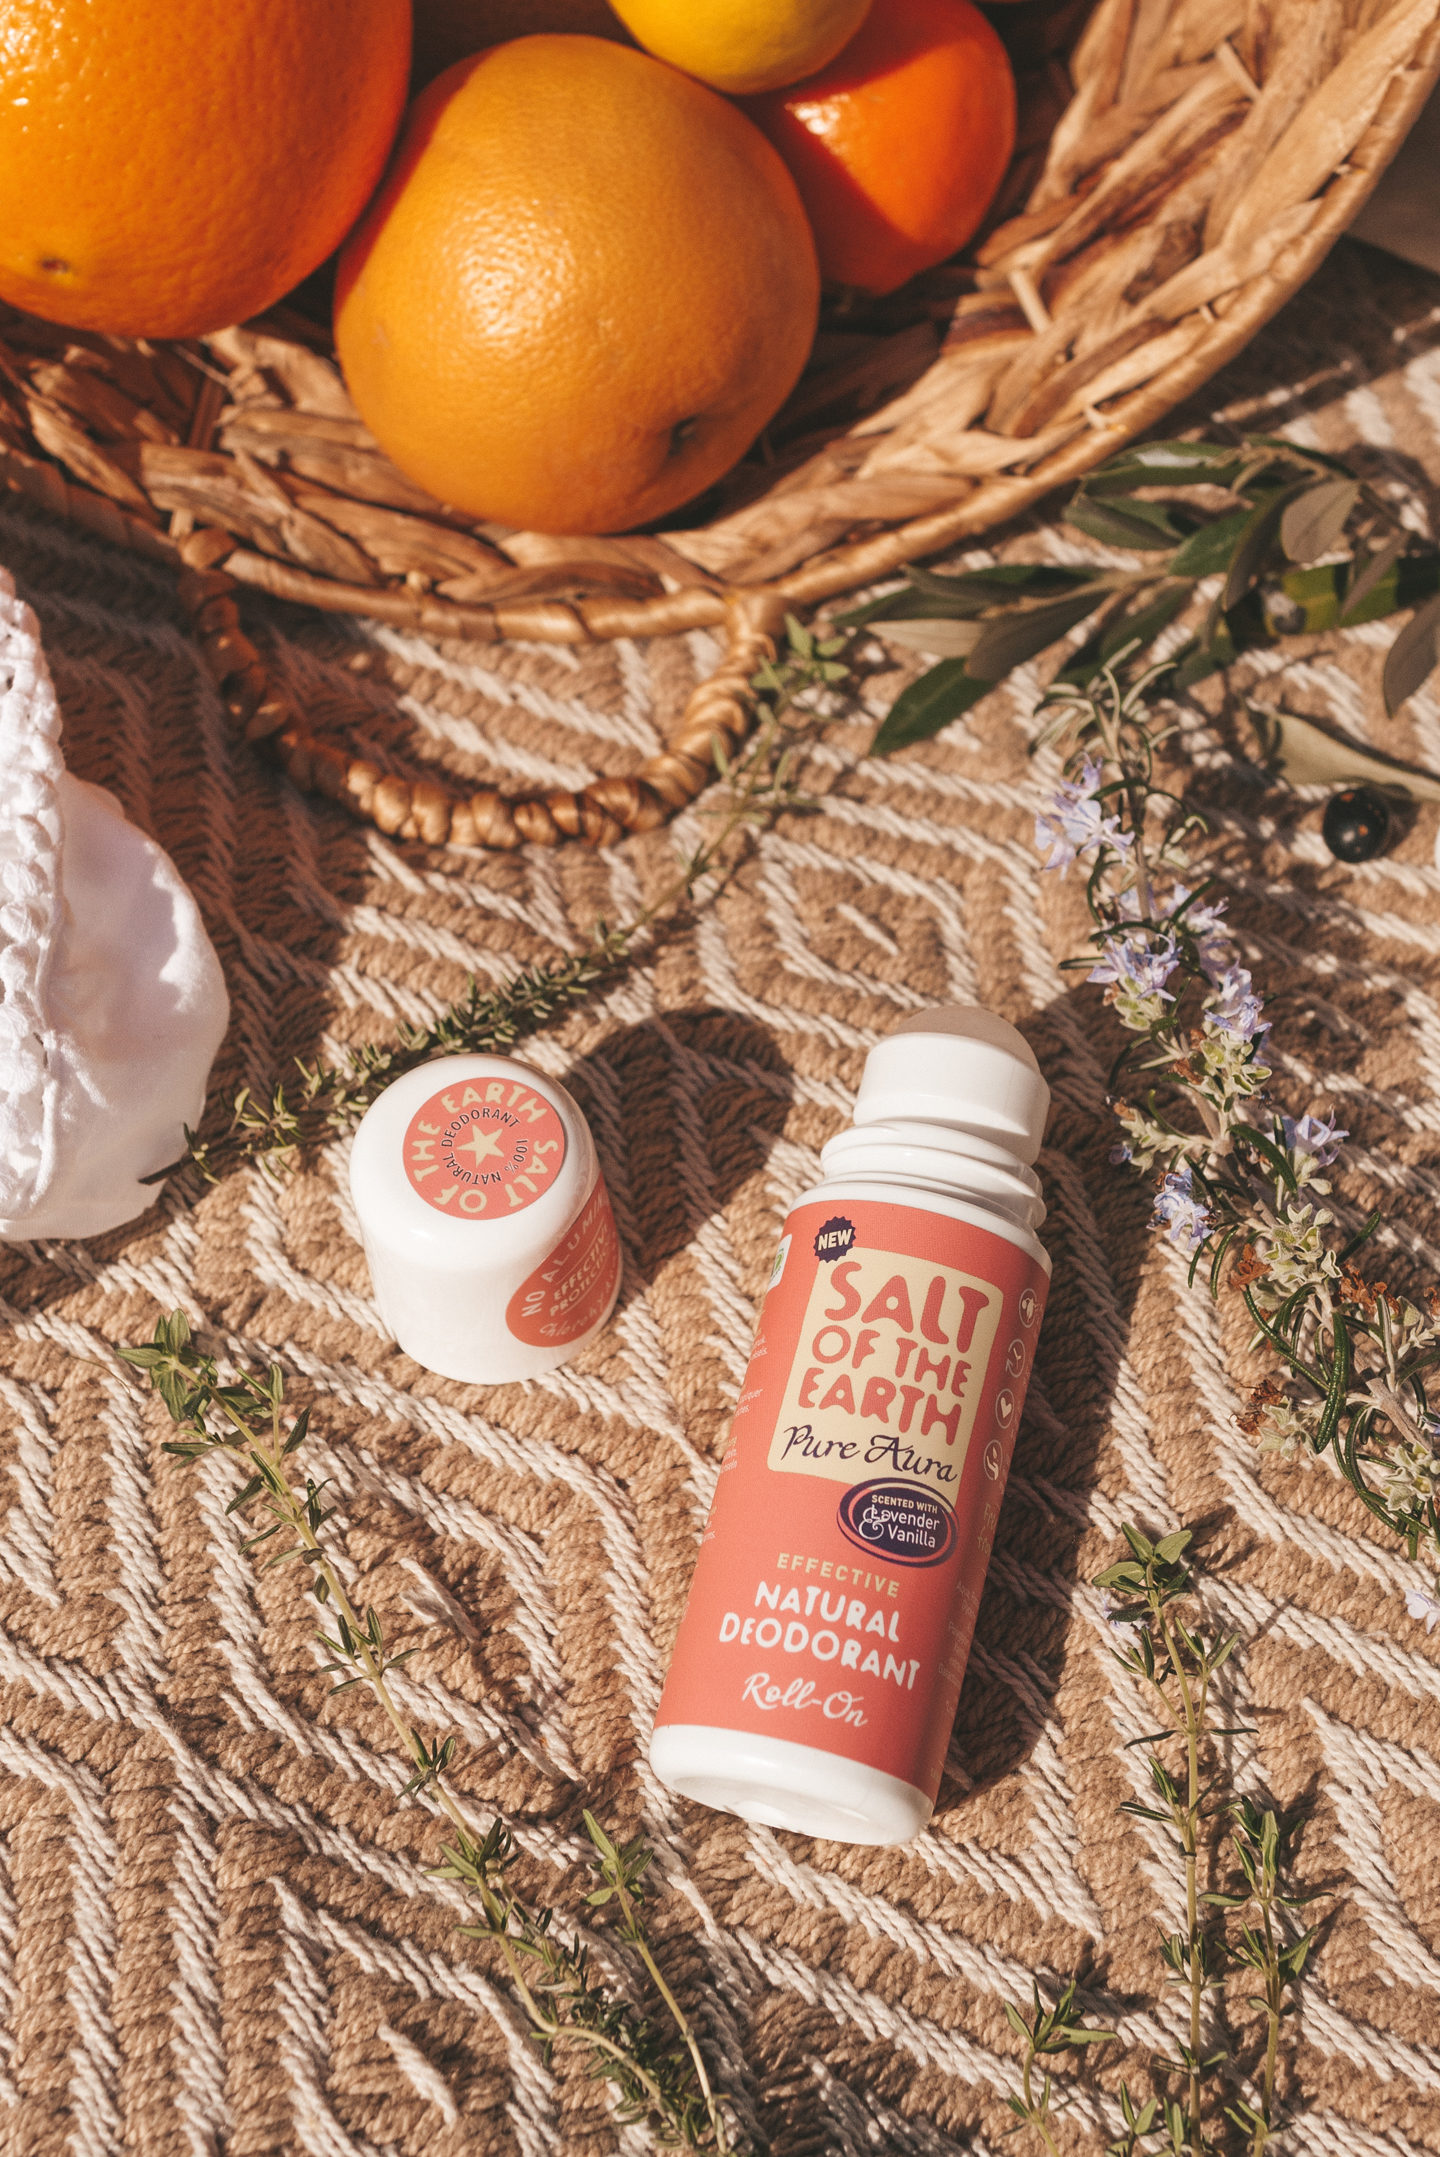 Salt of the Earth Roll-on deodorant Linda's wholesome life